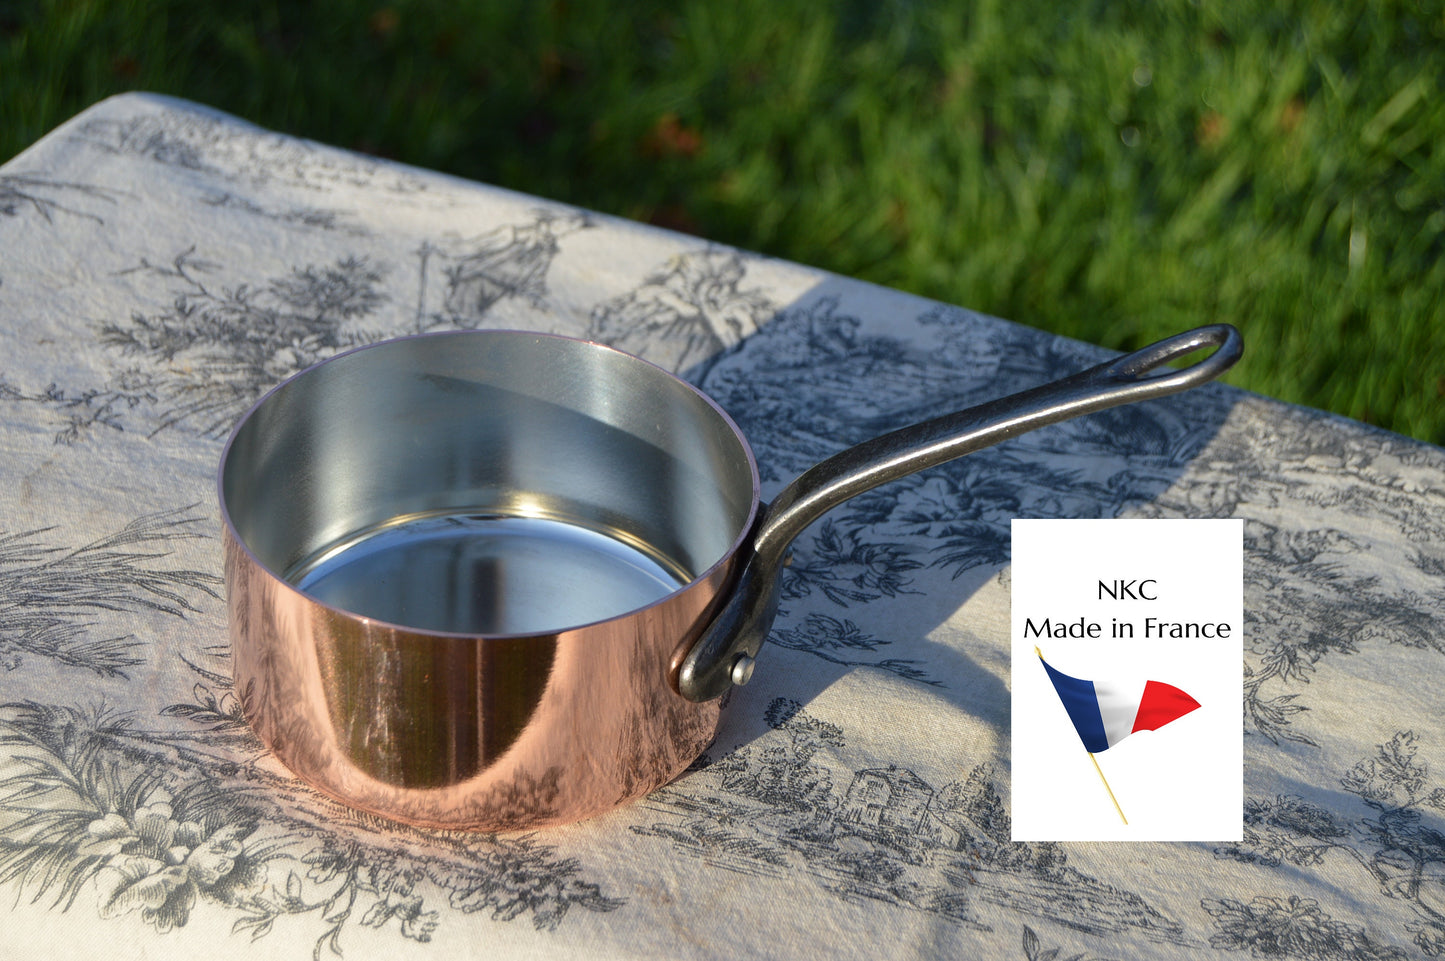 New 14cm NKC Copper Pan Tin Lined 1.5mm Professional Normandy Kitchen Copper Pot Iron Handle Steel Rivet Made in France 14cm 5 1/2" Saucepan